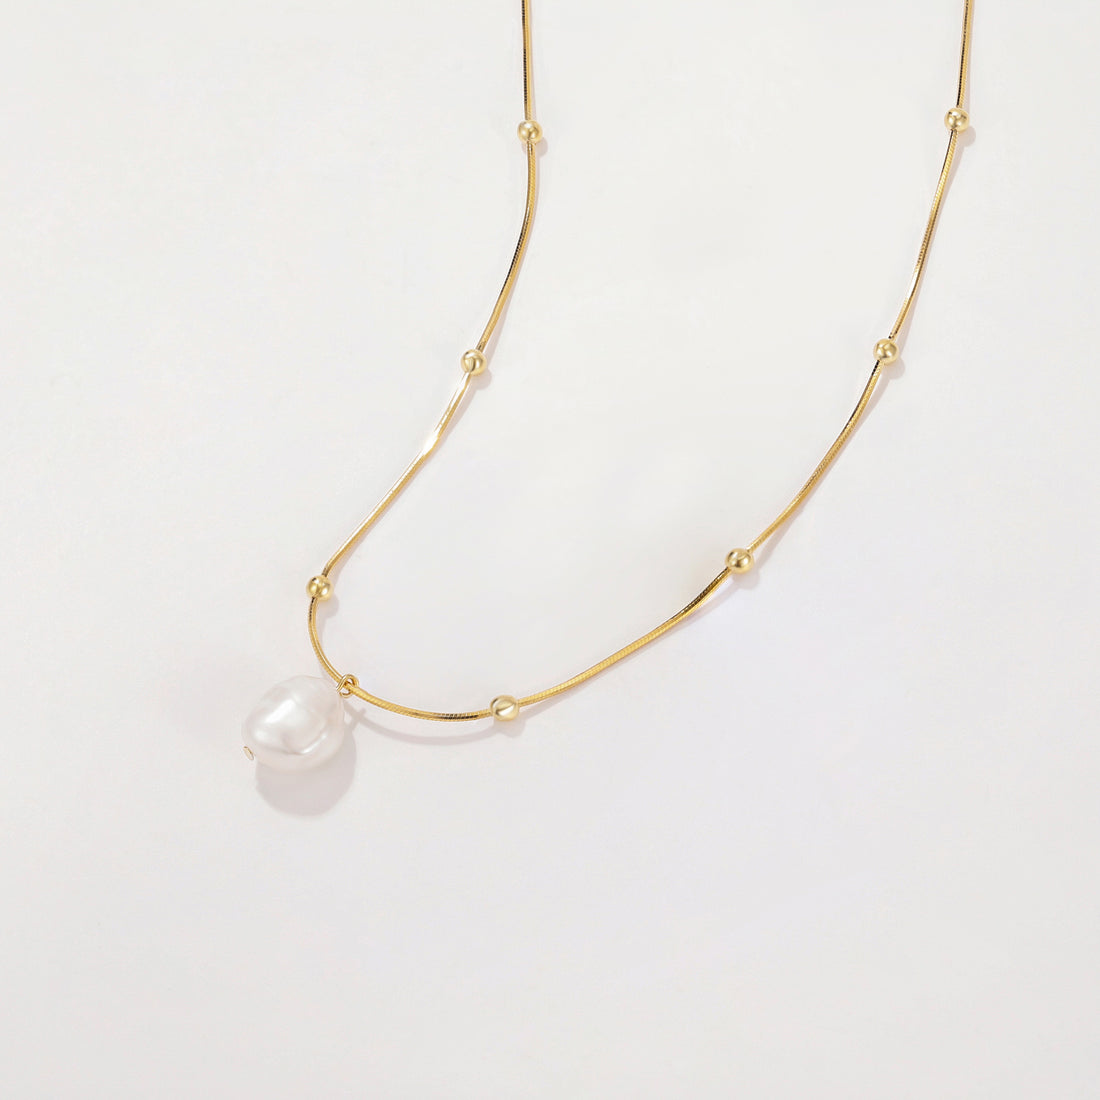 This Baroque Pearl Sterling Silver Bead Chain Necklace